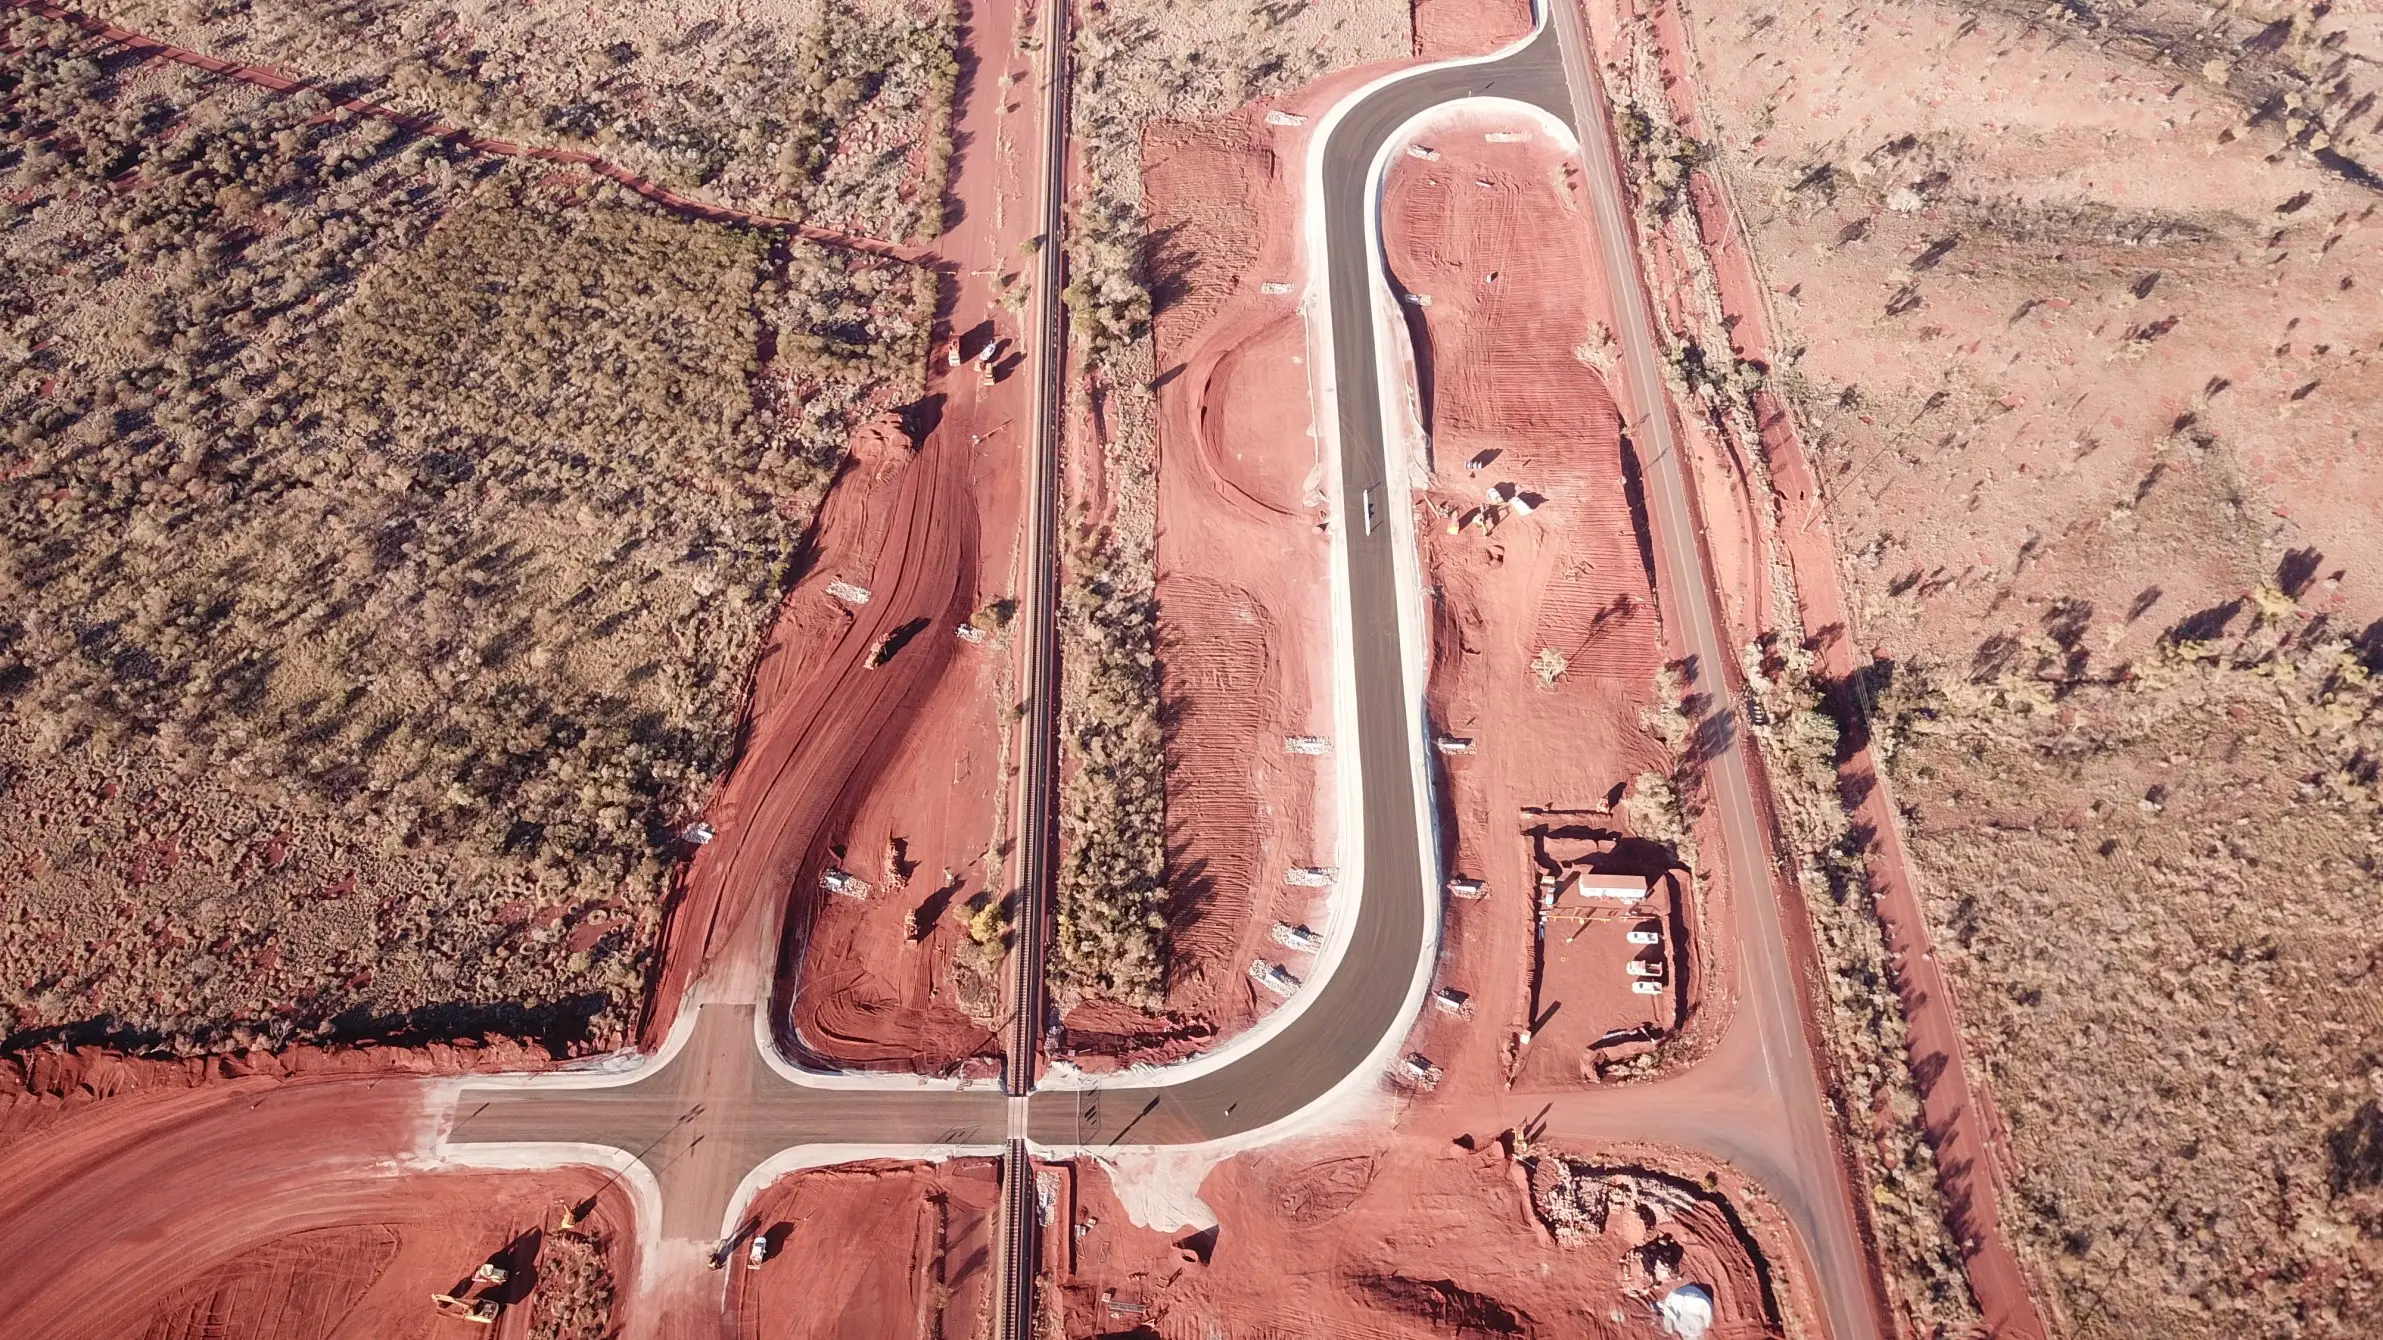 Road project from bird's-eye view